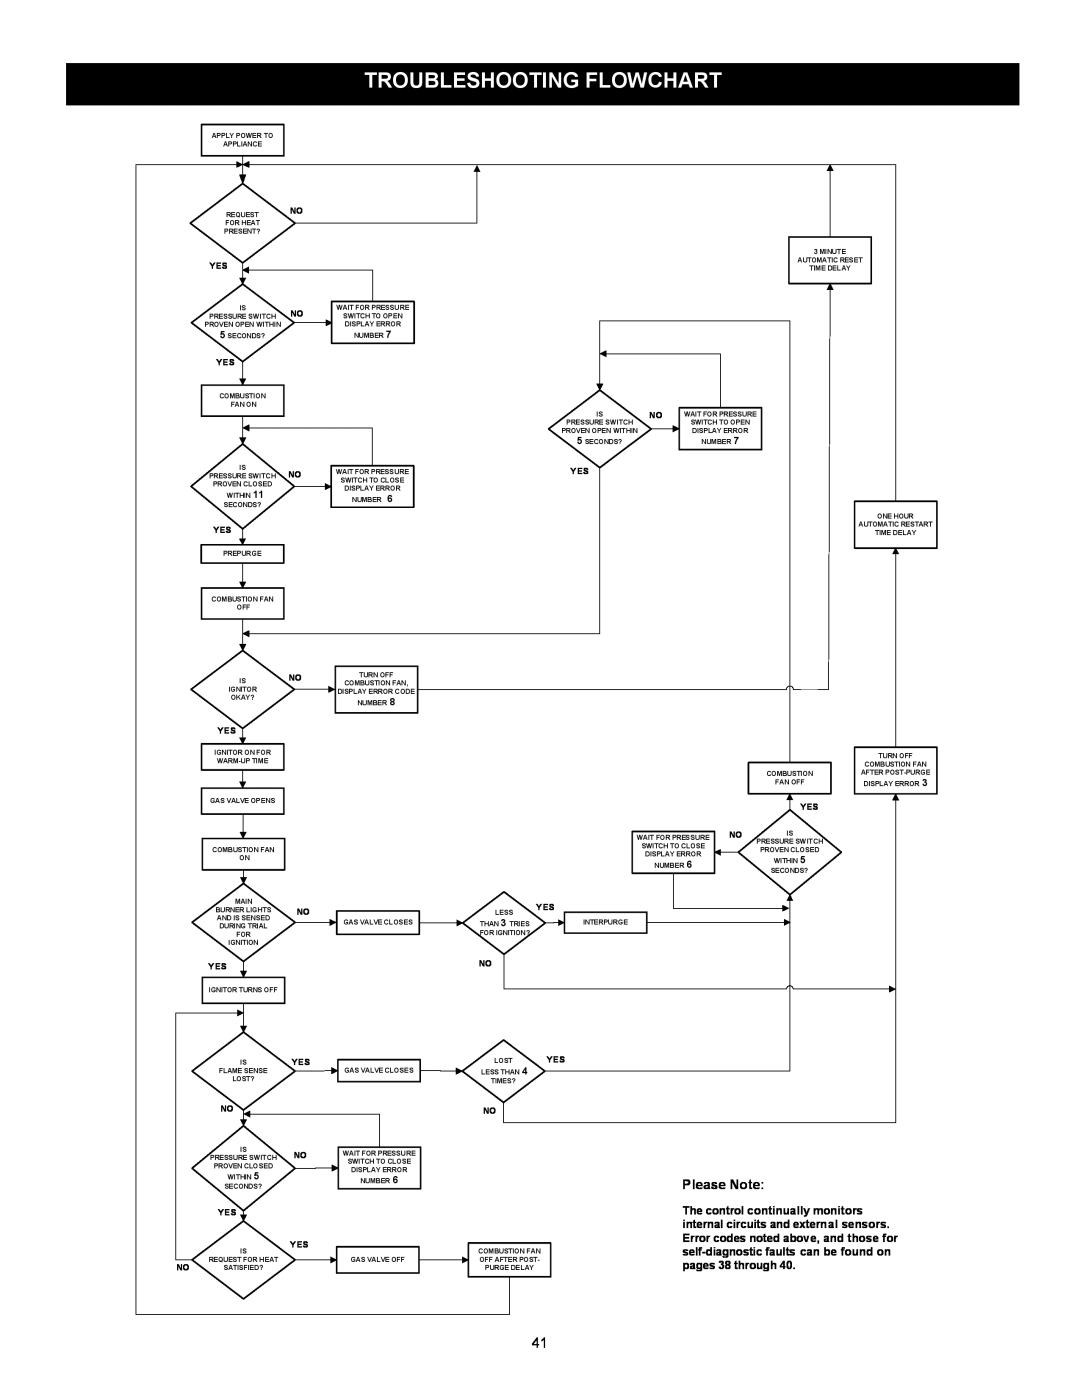 Kenmore 153.33262, 153.33264 Troubleshooting Flowchart, Please Note, The control continually monitors, pages 38 through 